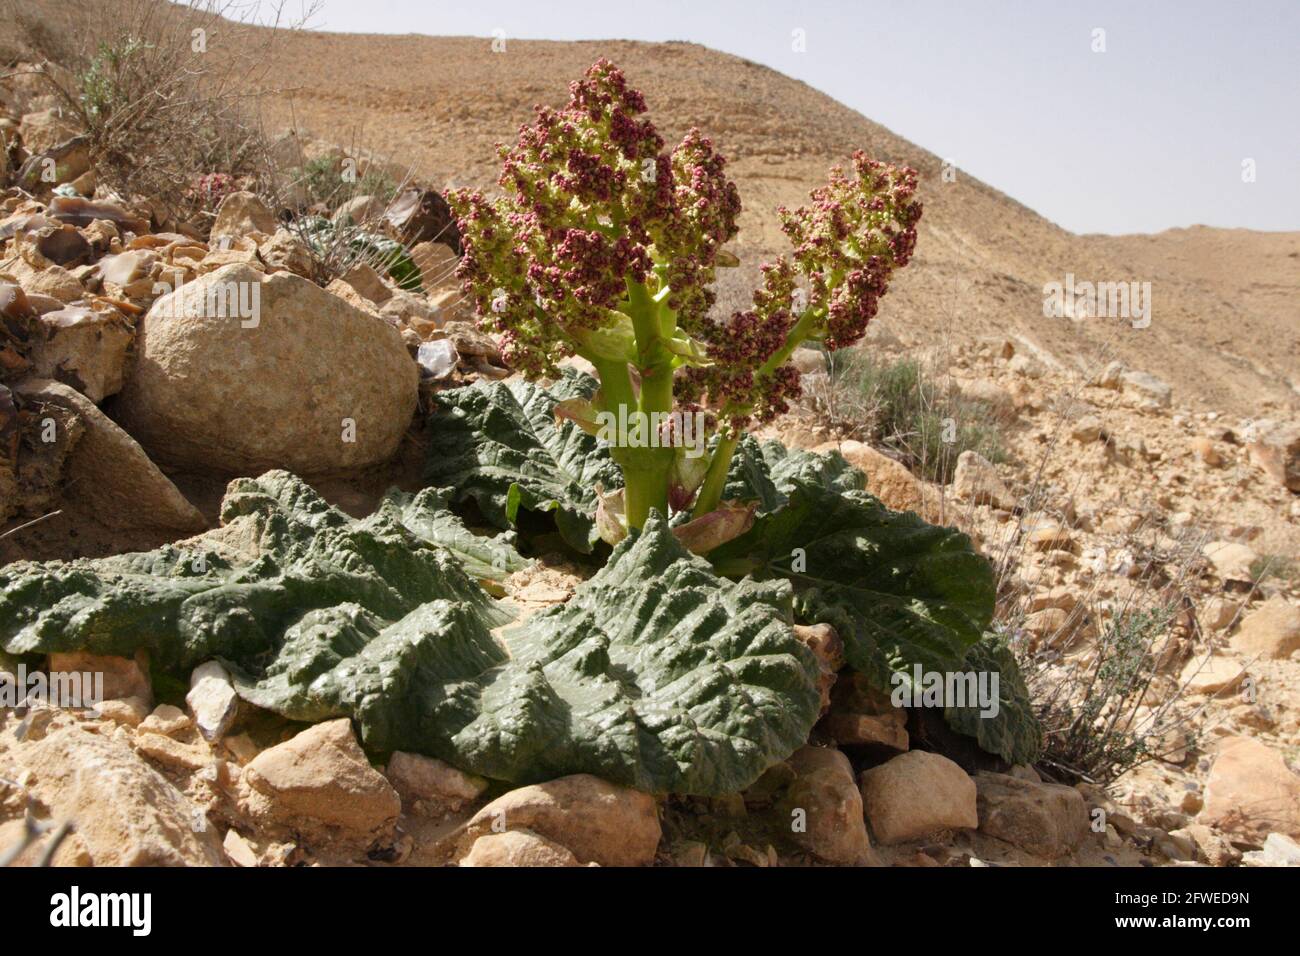 Desert Rhubarb or Rheum Palaestinum endangered plant from the Polygonaceae family, parts of the plant are edible others have therapeutic uses, Negev. Stock Photo